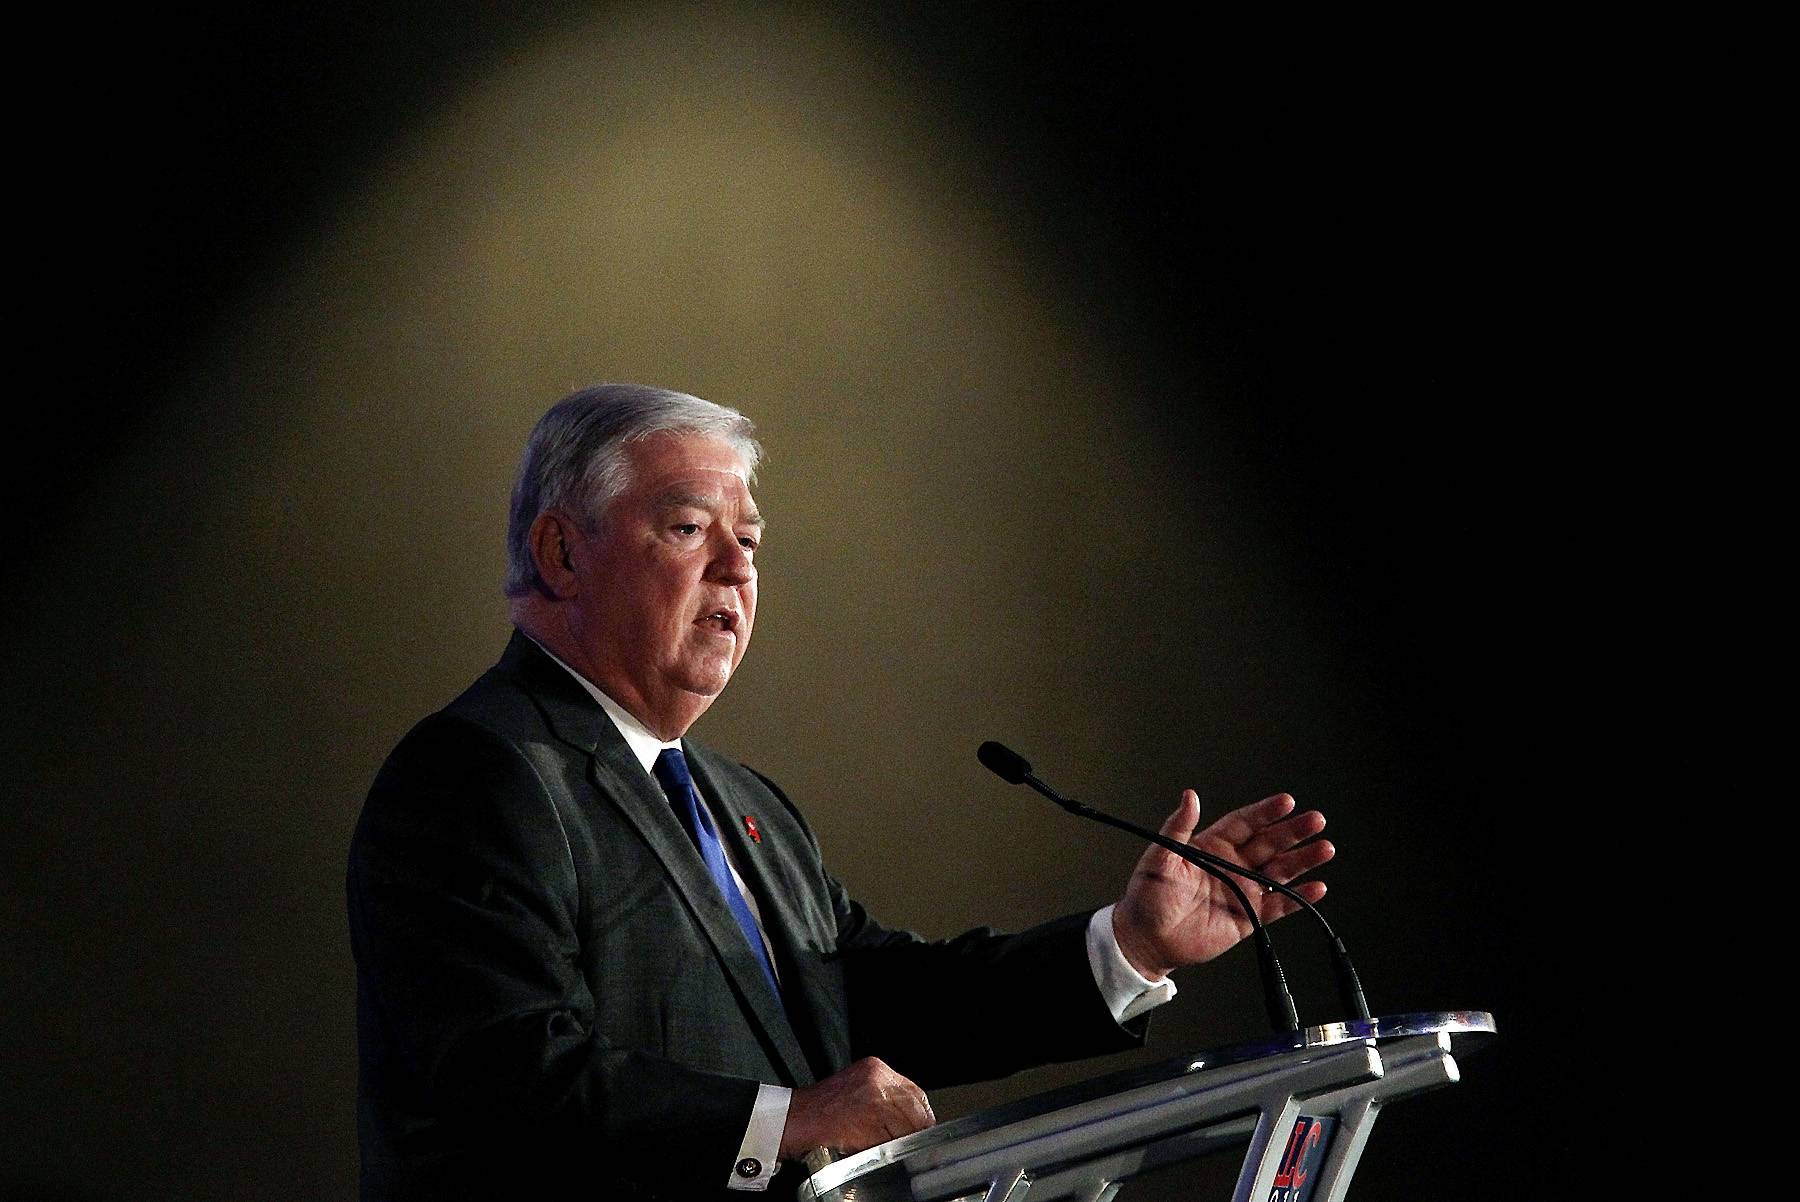 Mississippi Court Upholds Ex-Gov. Haley Barbour’s Controversial Pardons - On Thursday, the&nbsp;Supreme Court of Mississippi&nbsp;upheld the controversial pardons issued by the state’s former governor&nbsp;Haley Barbour&nbsp;during his last days in office.(Photo: Justin Sullivan/Getty Images)